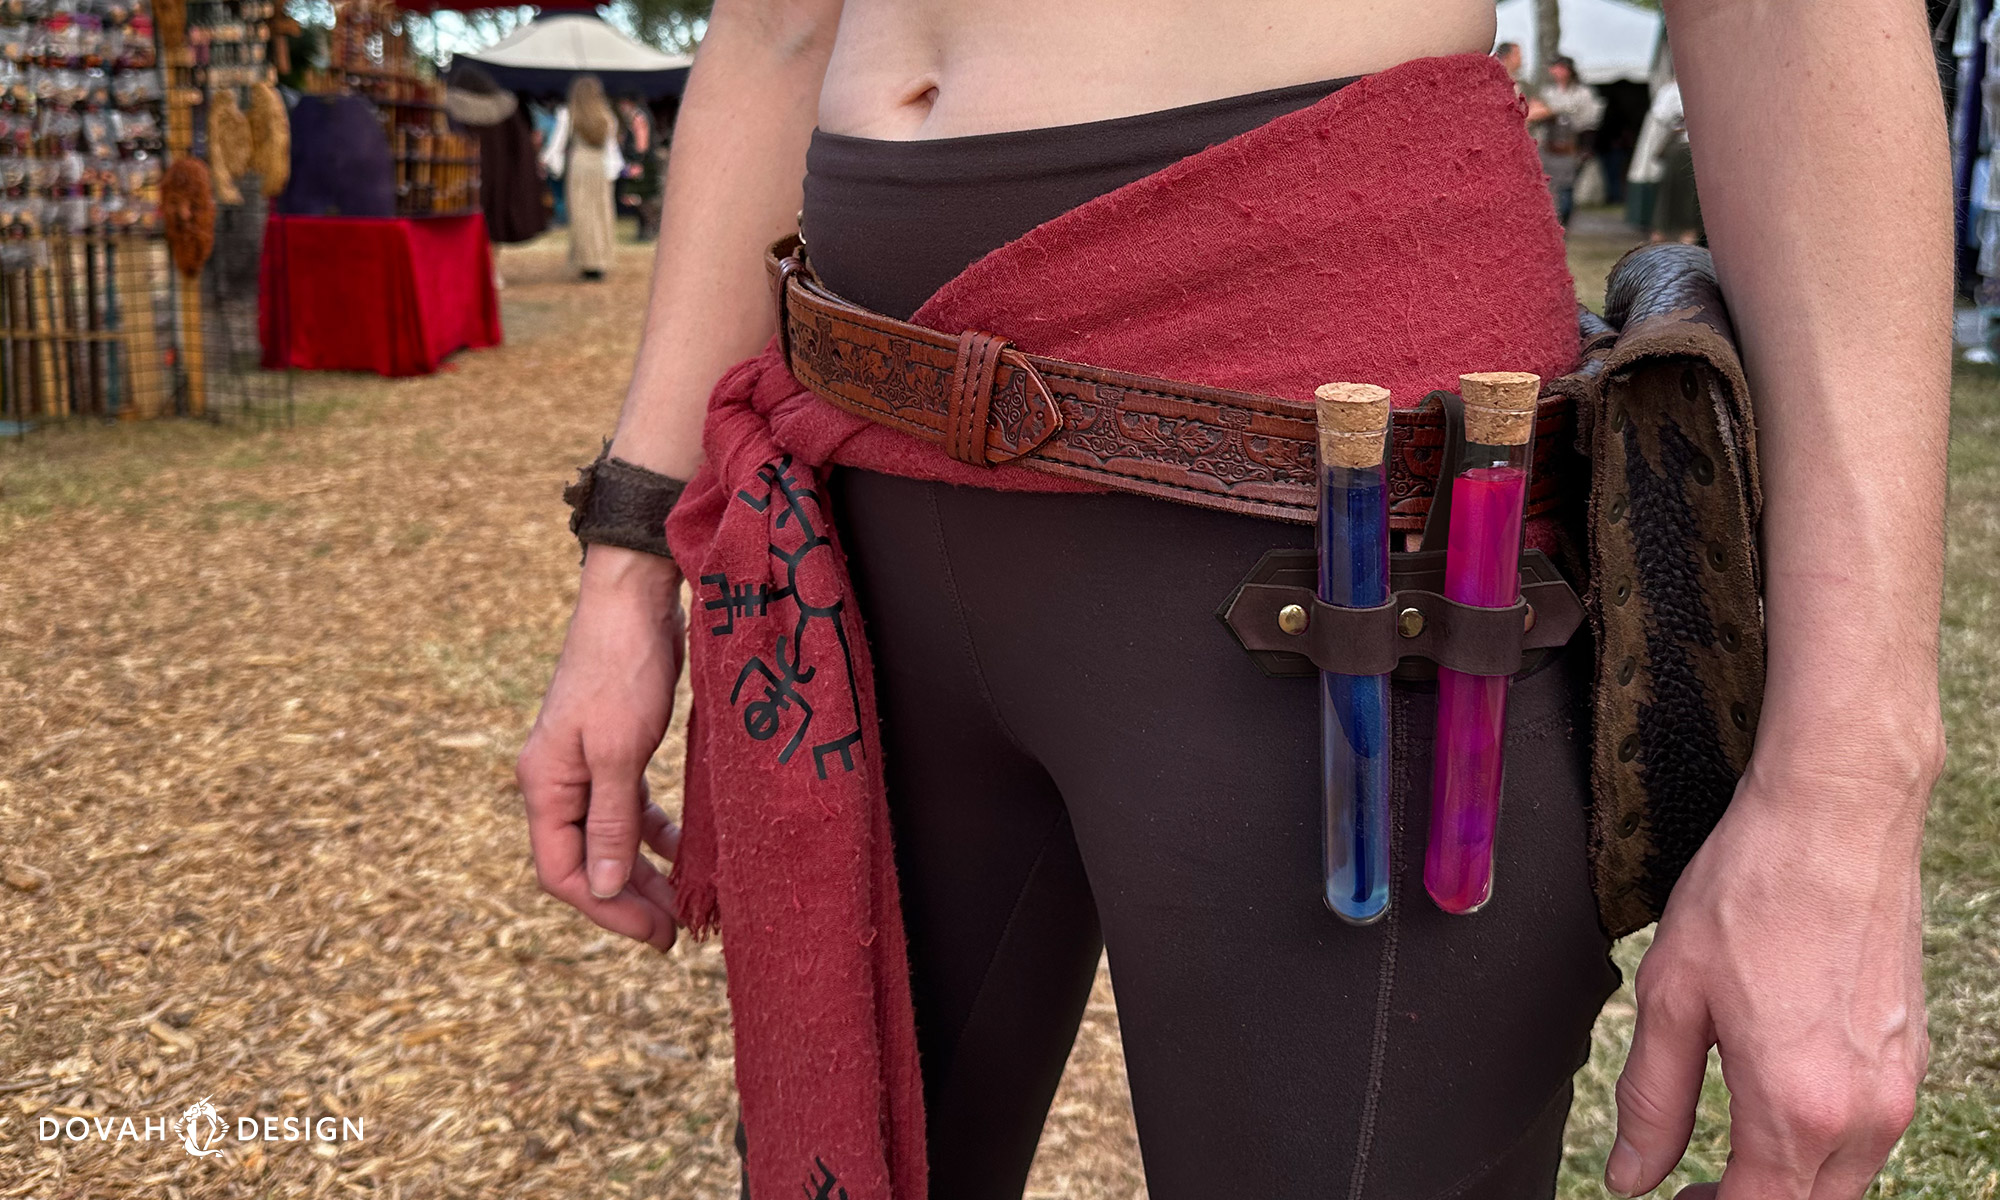 View of a "dark brown" double potion handmade leather holster affixed to a woman's belt, Renaissance Fair fair ground visible in the background. Potions seen in leather holster are blue and pink.